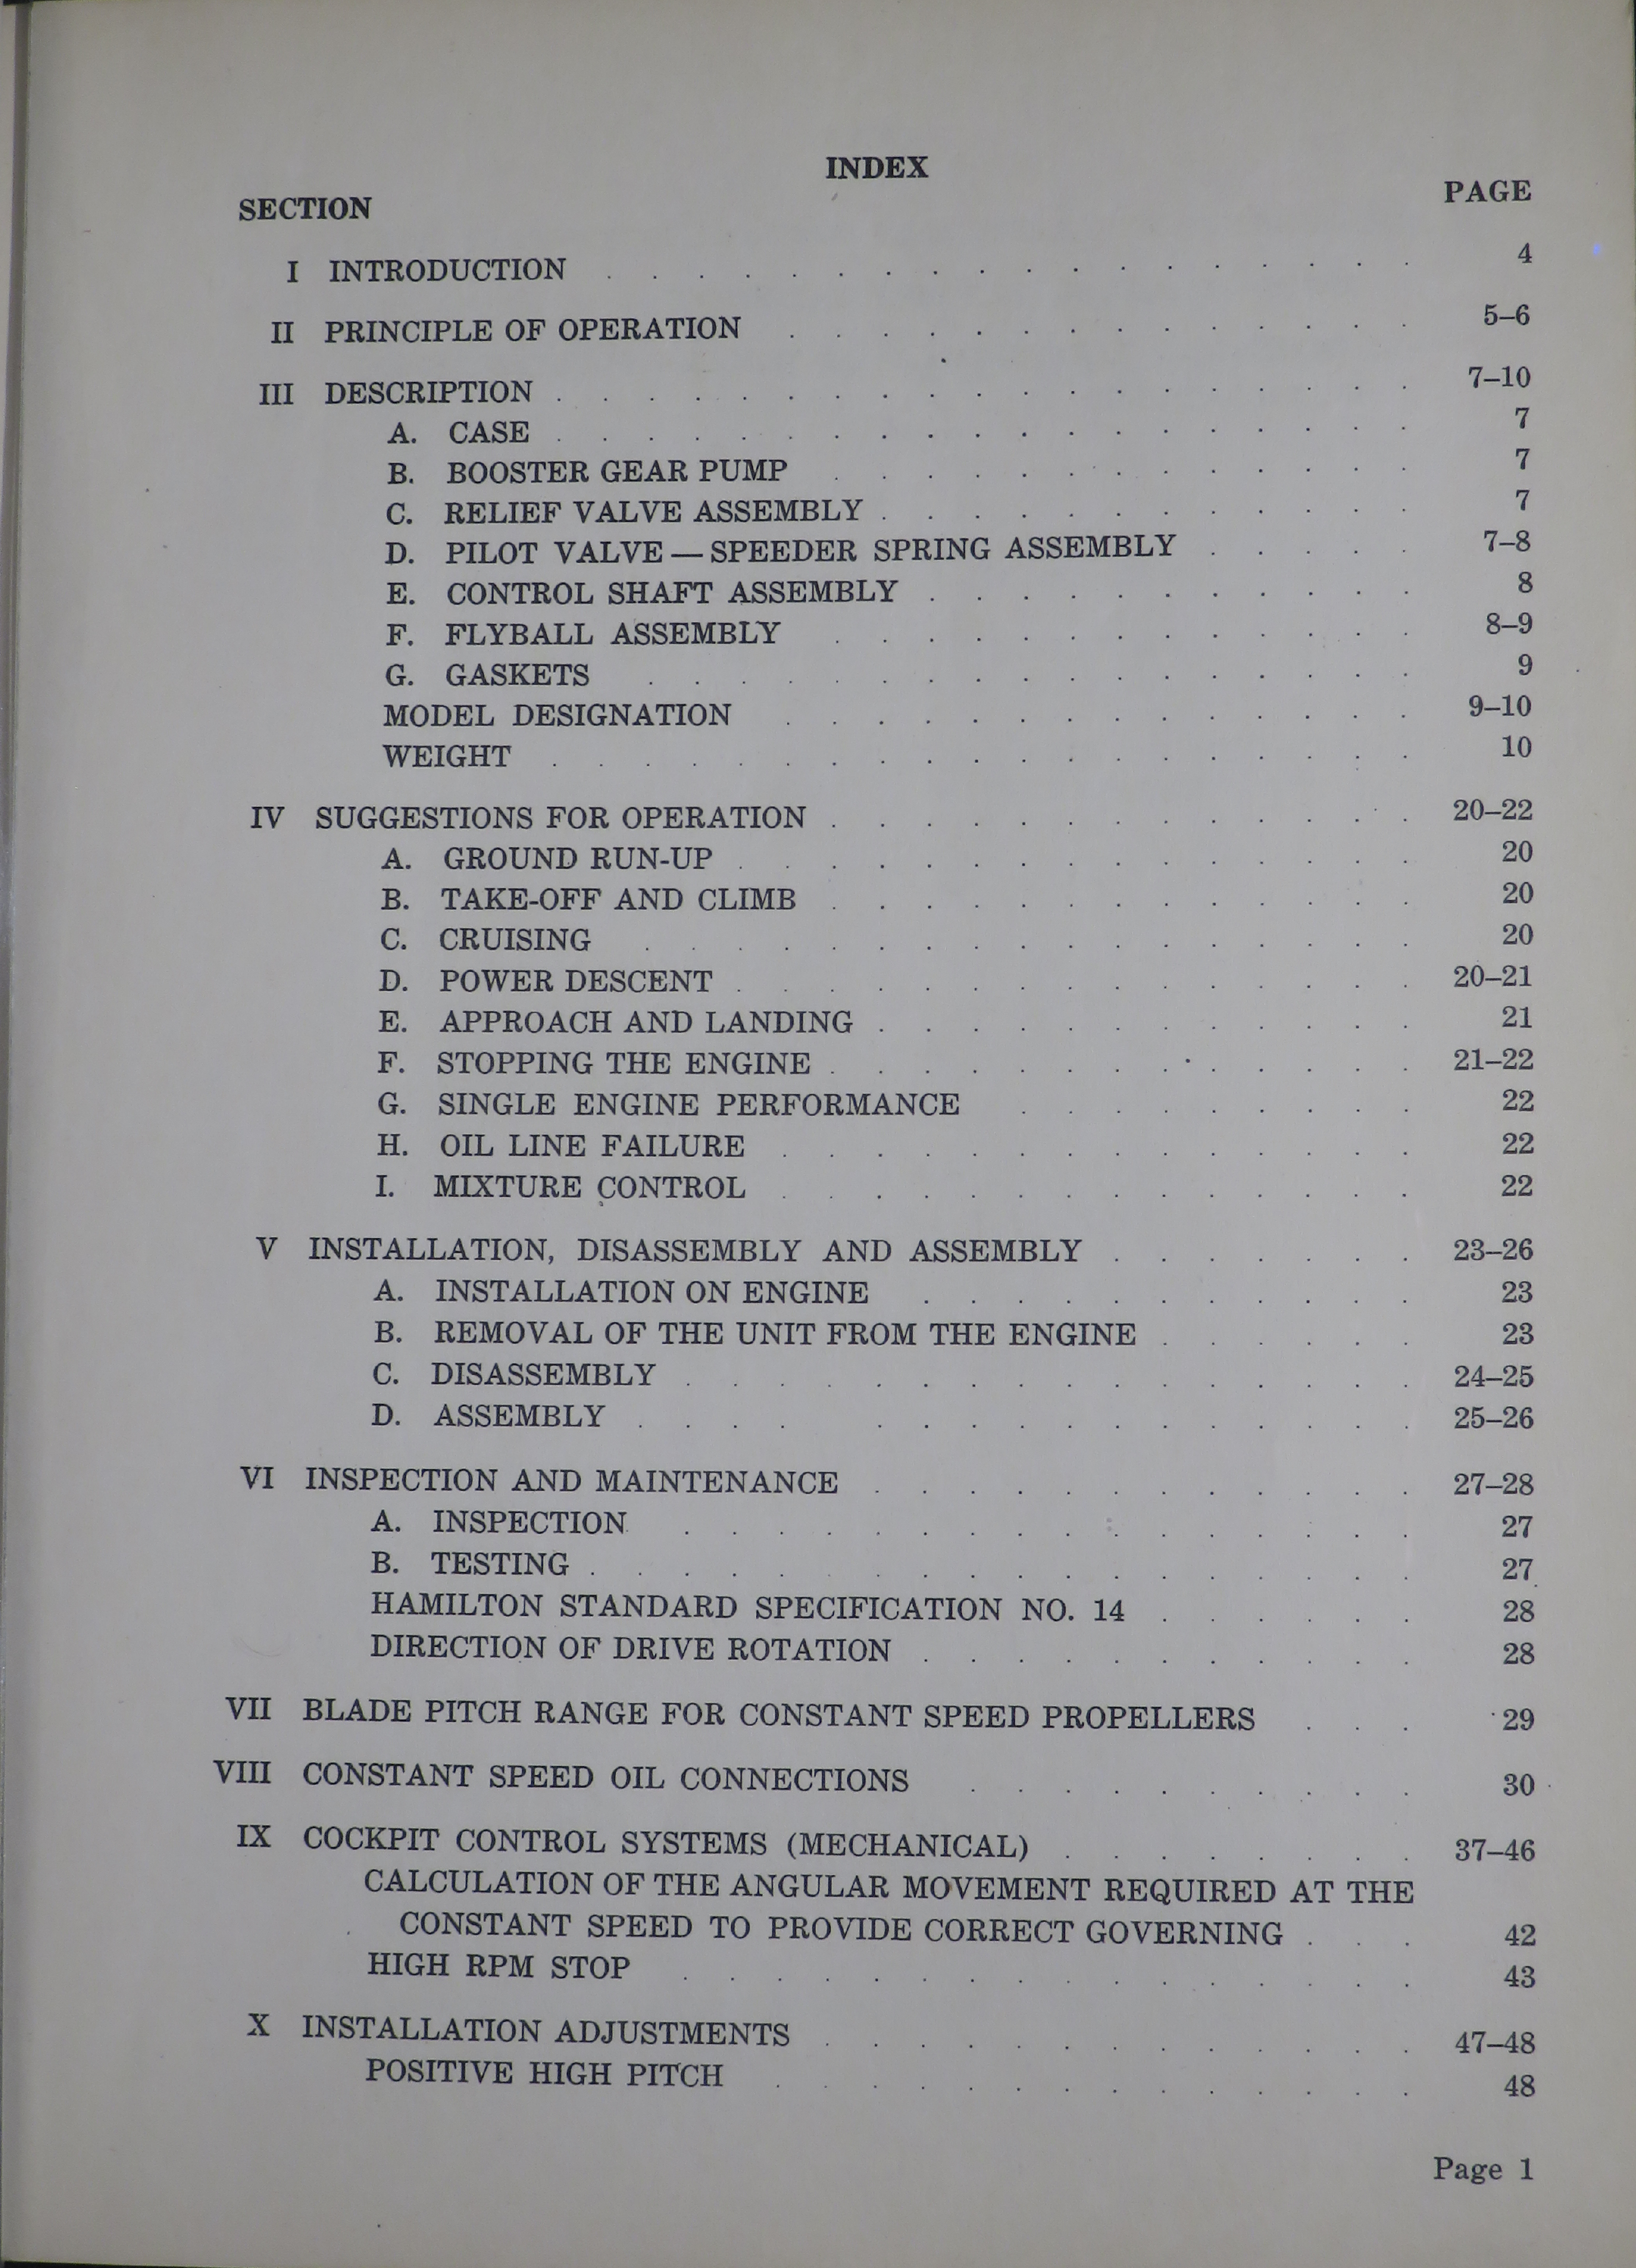 Sample page 5 from AirCorps Library document: Installation, Operation, & Maintenance Inst for Constant Speed Control